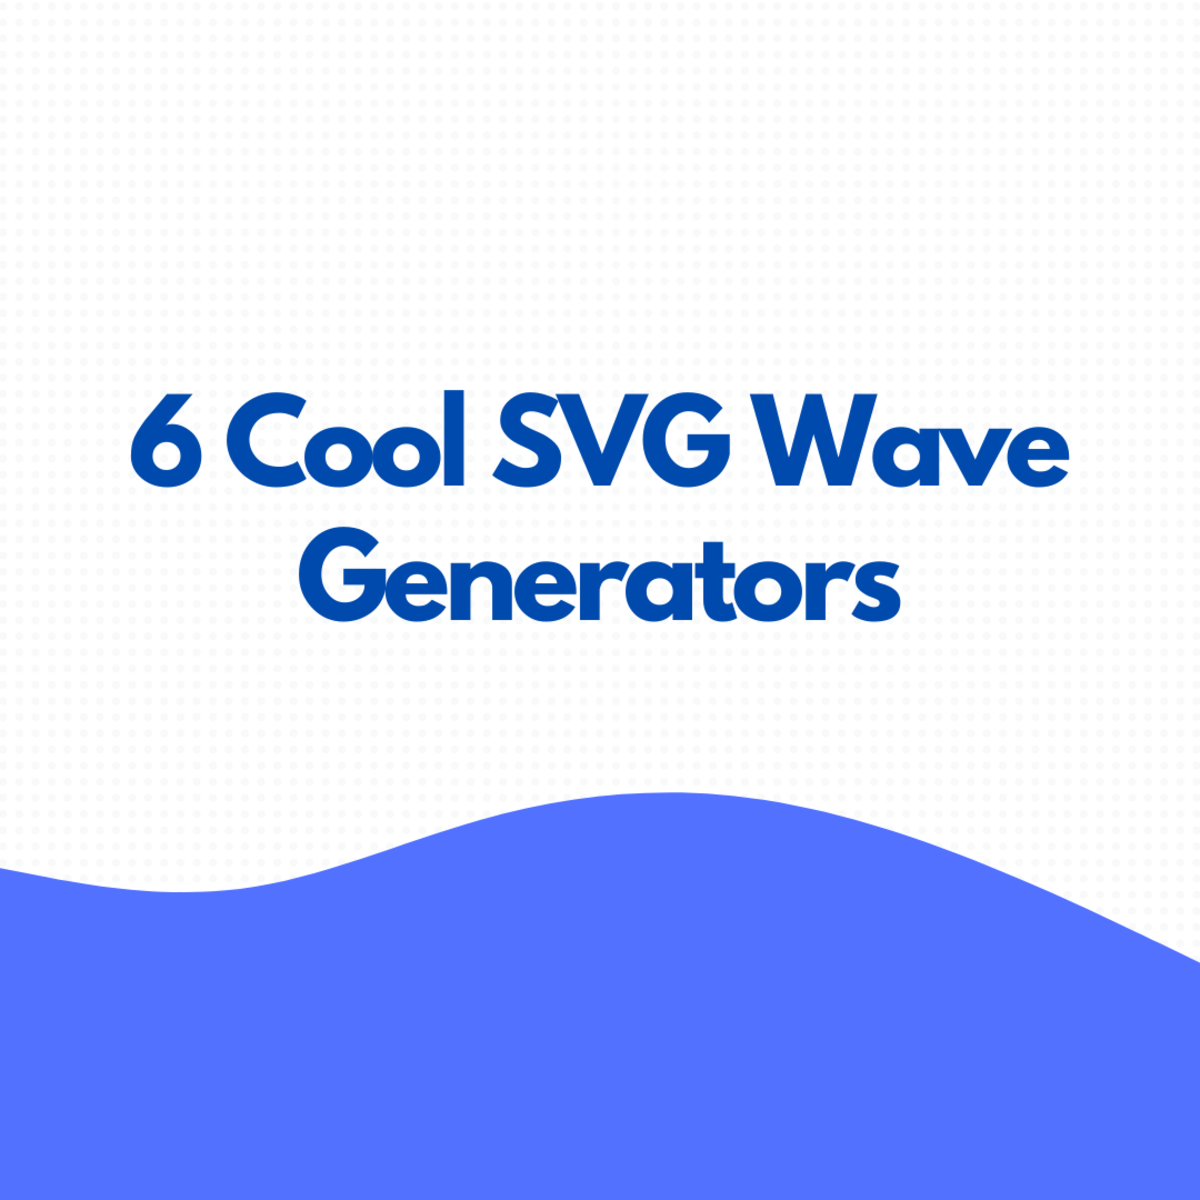 6 Best SVG Wave Generators to Check Out: The Ultimate List